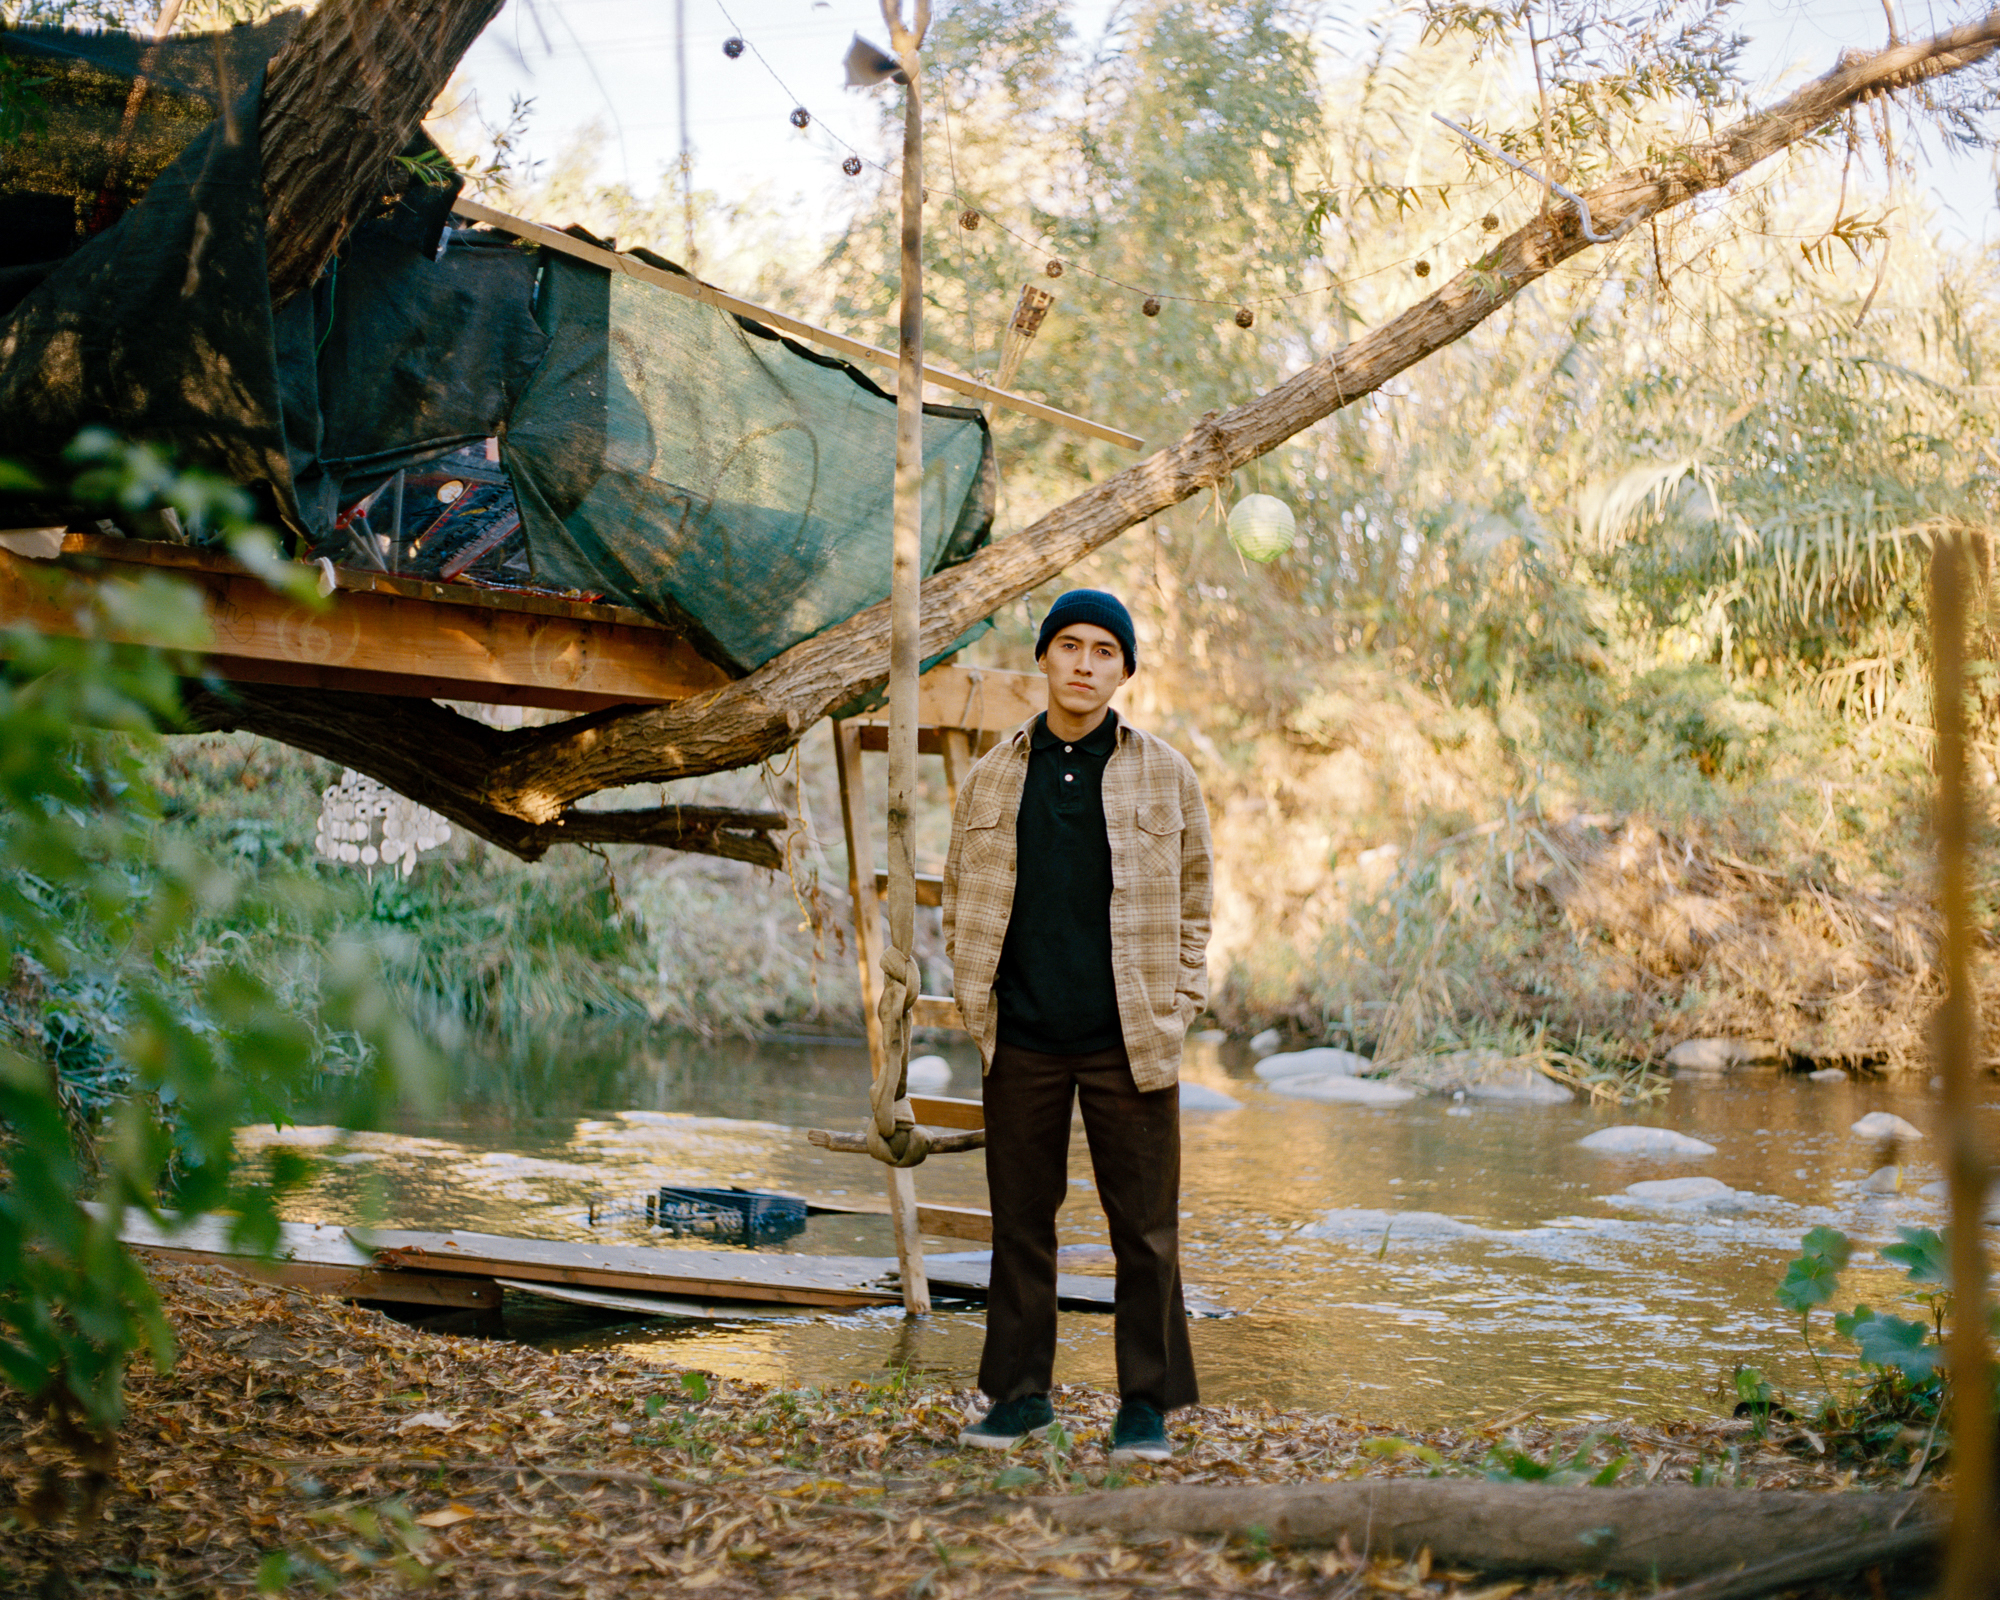 A neighborhood teenager with his tree fort - Frogtown, 2016